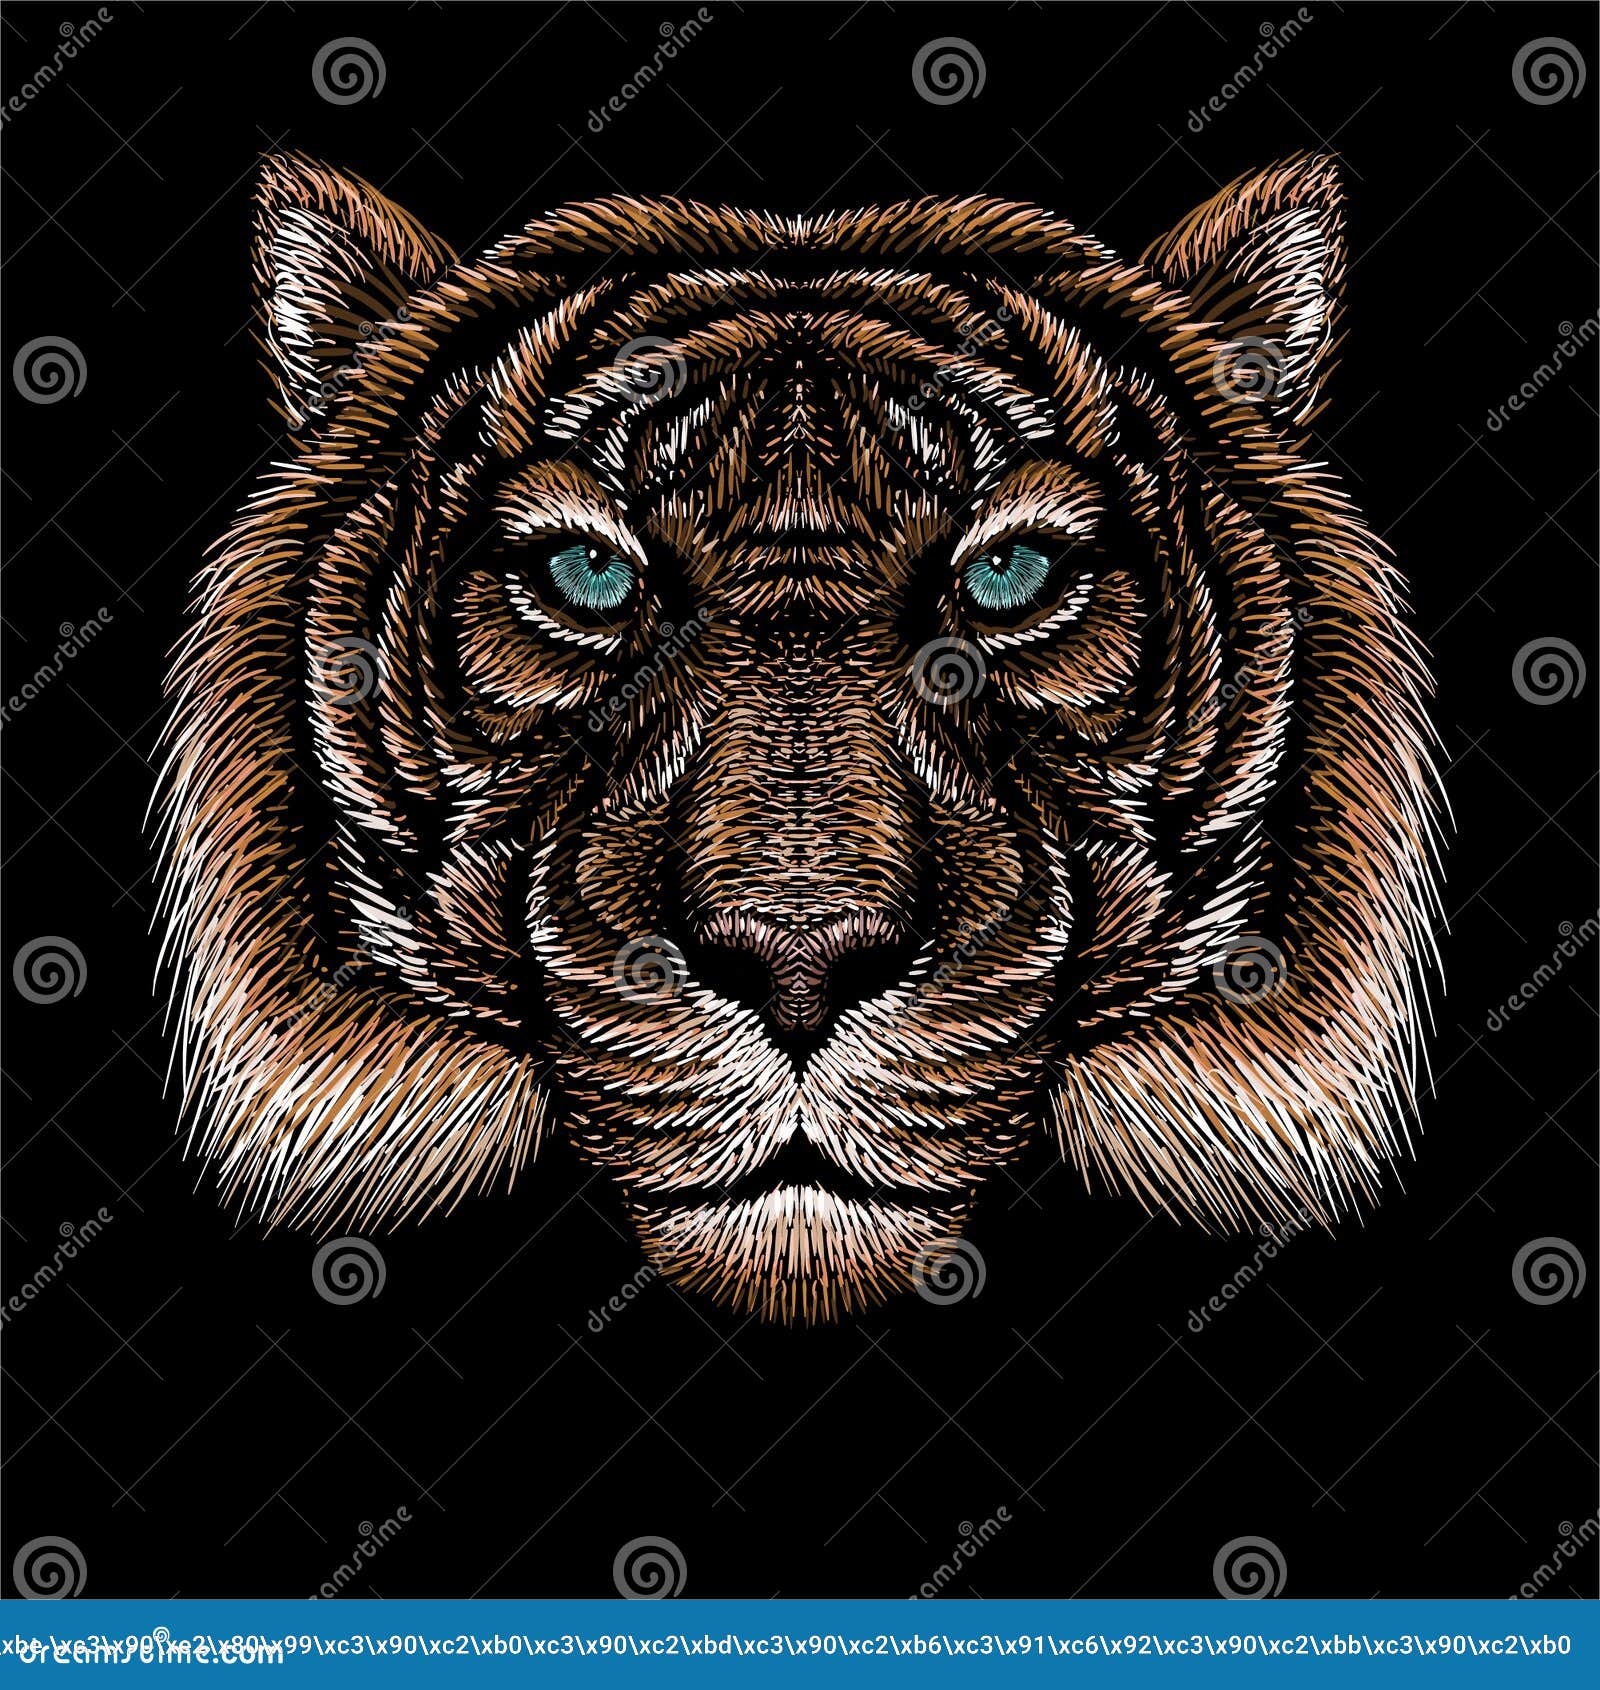 The Vector Logo Tiger for Tattoo or T-shirt Design or Outwear. Hunting  Style Big Cat Print on Black Background Stock Illustration - Illustration  of sketch, logo: 179947564